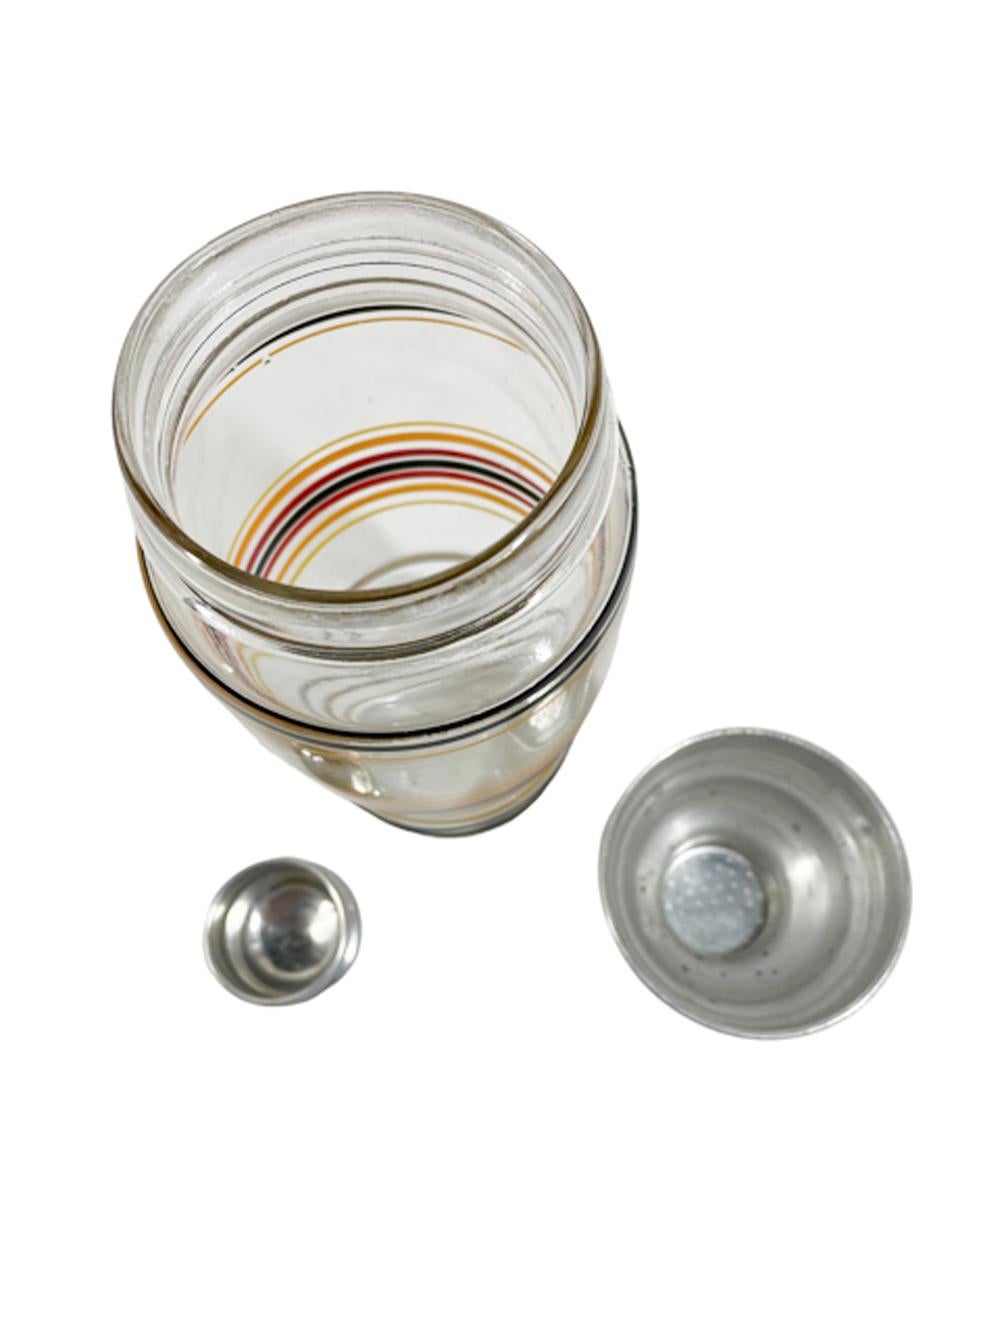 Aluminum Art Deco Cocktail Shaker Set with Hand Painted Black, Red, Orange & Yellow Bands For Sale